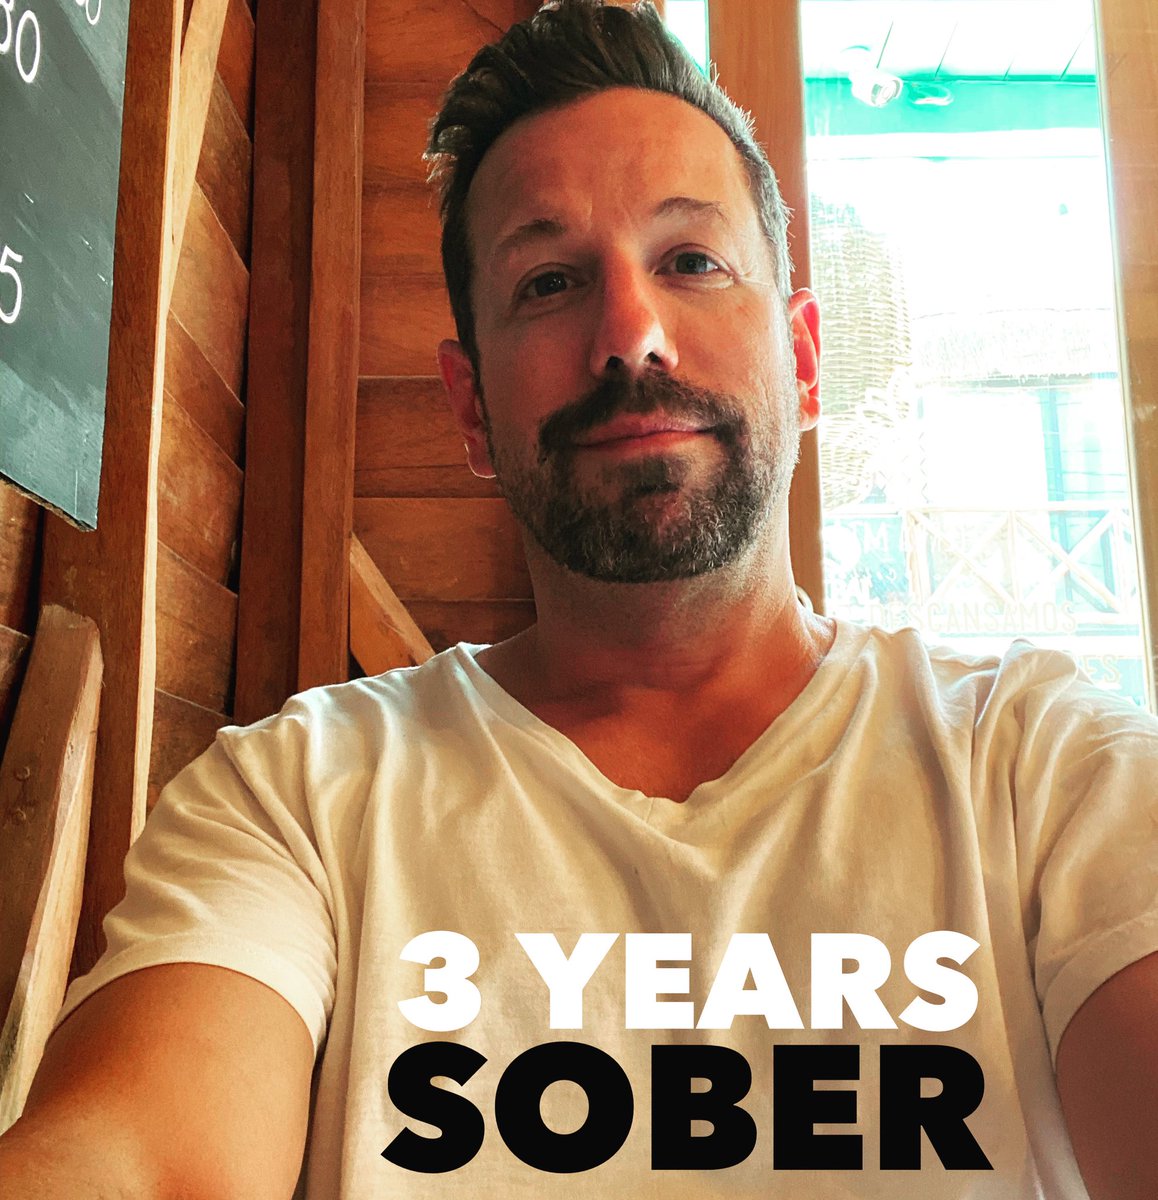 3 years sober!
On my 3rd sober bday, I'll scream: IF YOU'RE IN NEED OF HELP, SAY SOMETHING. Tell a friend, a parent, a brother or sister, a doctor, or even a comedian on social media! 
#sober #iwndwyt #iwndwytd #iwndwy #sobriety #sobrietyrocks #stopdrinking #stopdrinkingalcohol